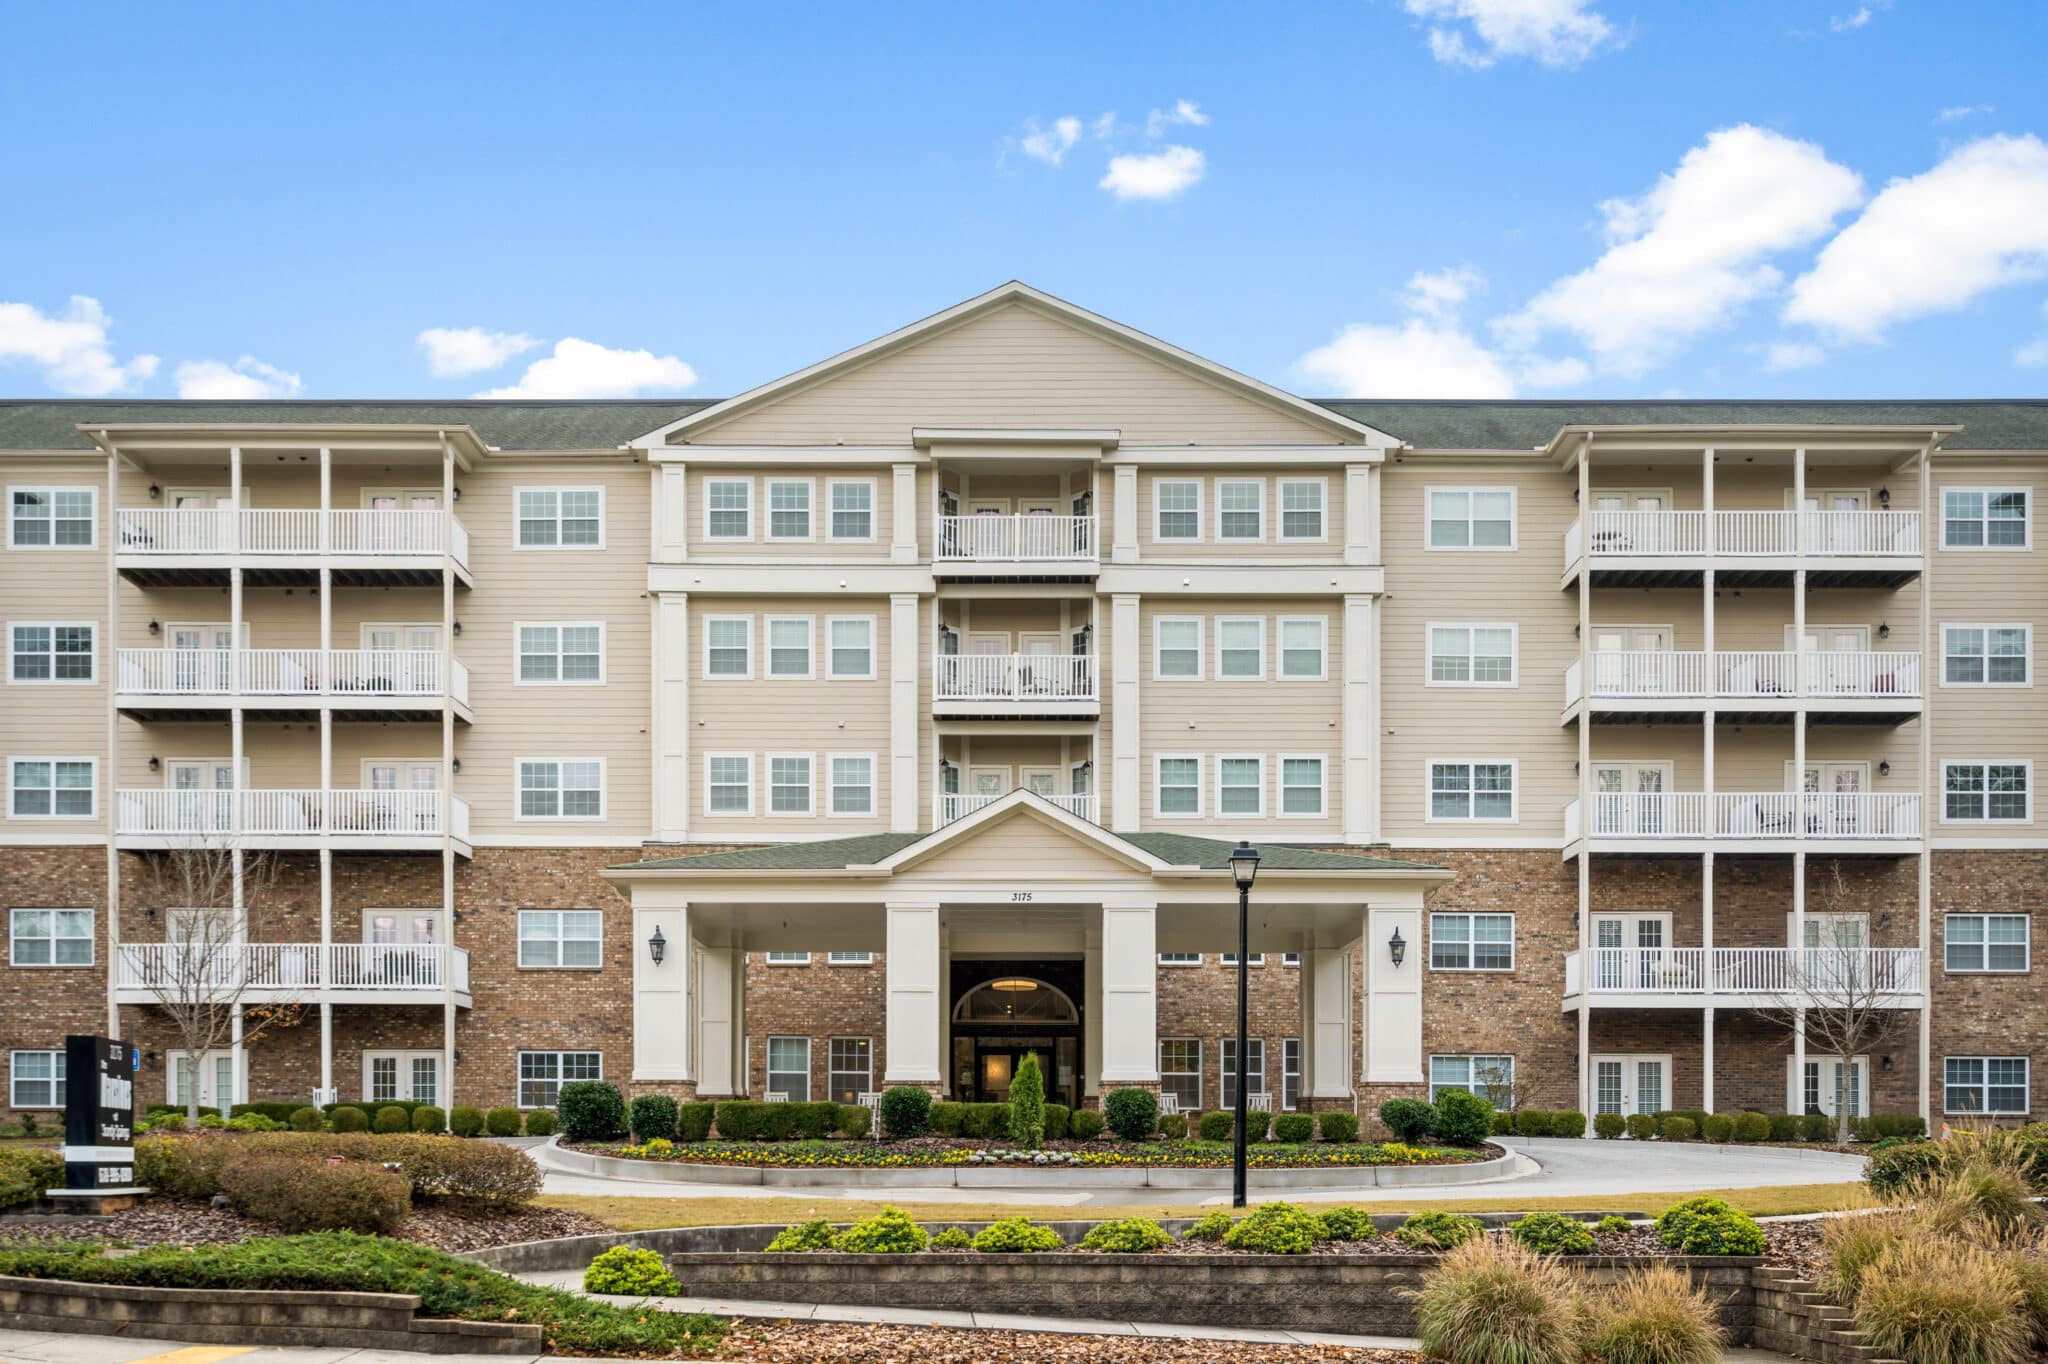 Mansions of Sandy Springs Peachtree Corners Georgia Senior Independent Living